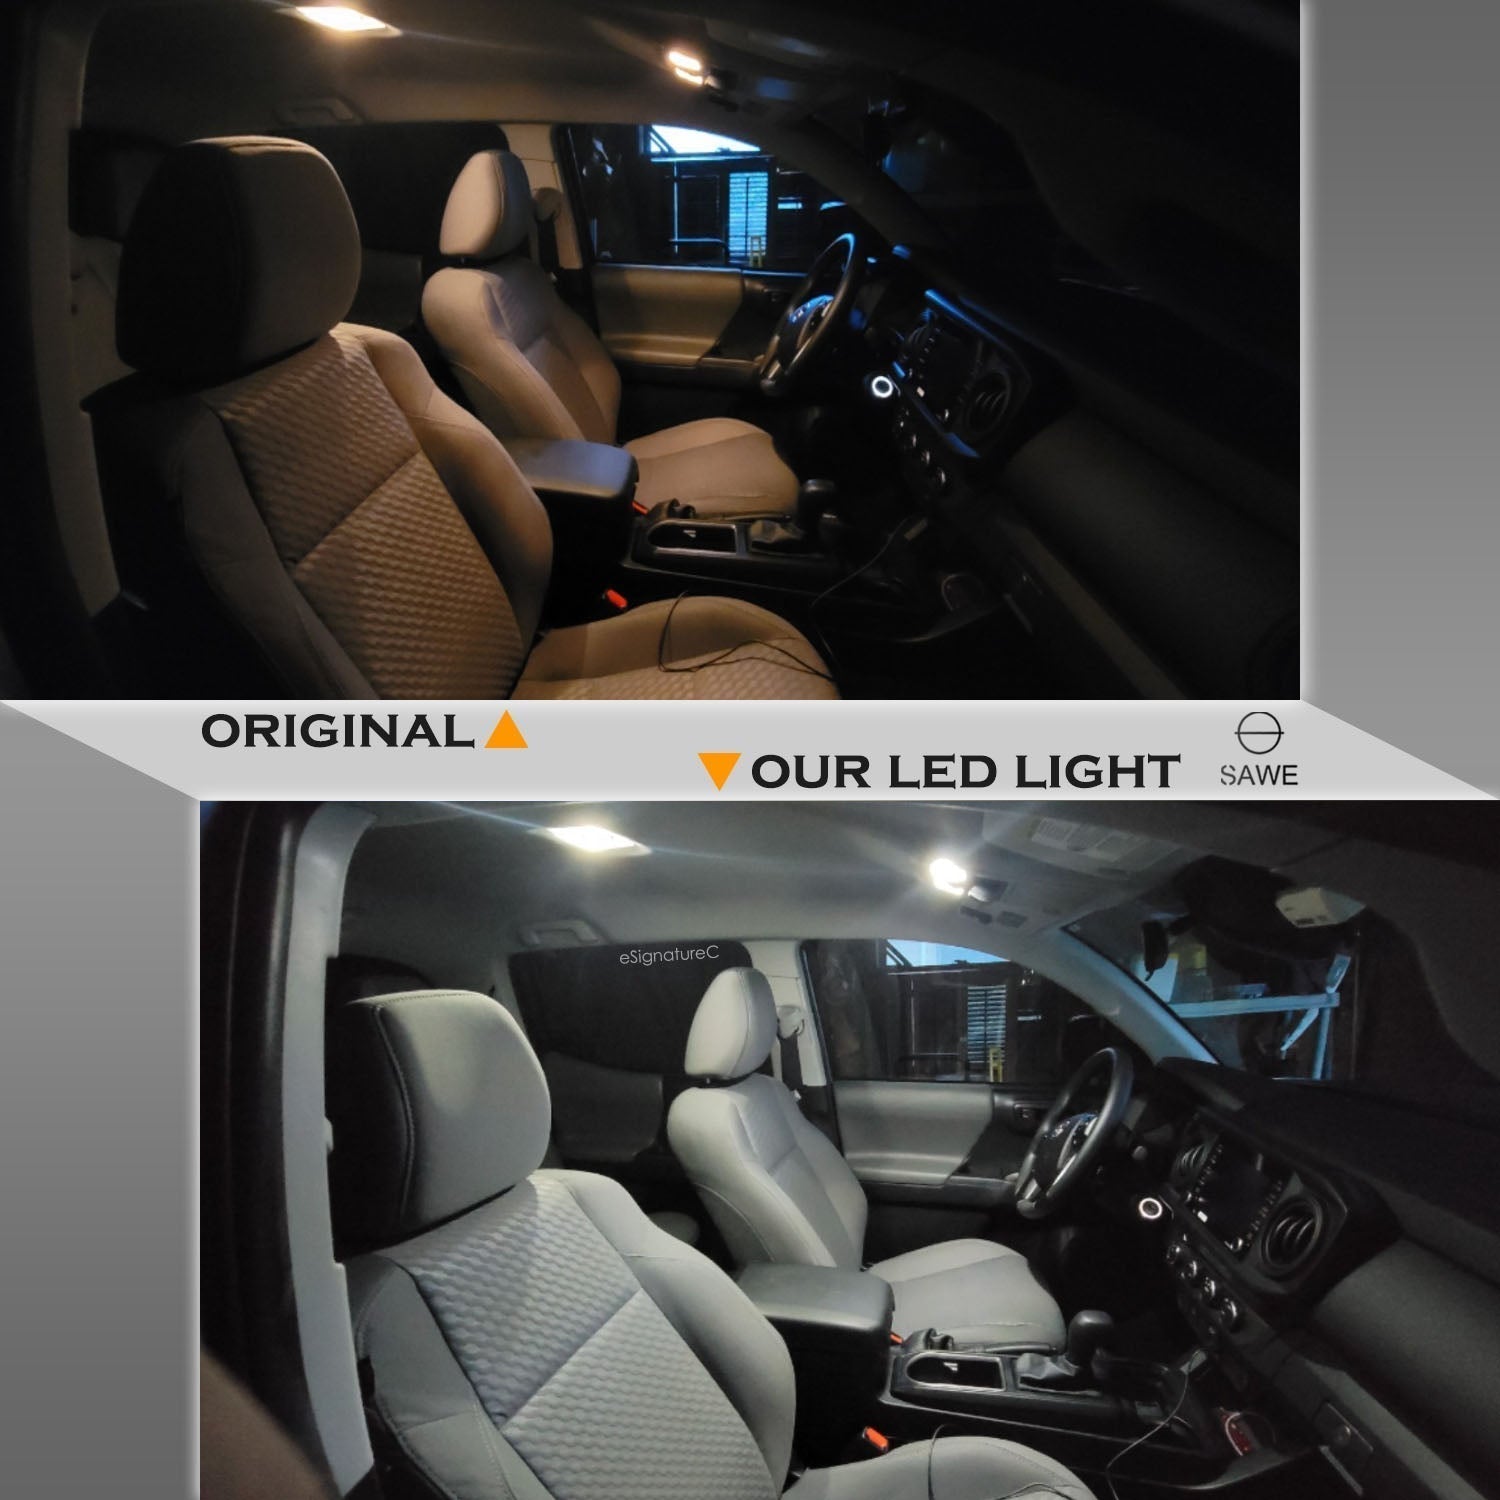 For Acura RDX Interior LED Lights - Dome & Map Light Bulbs Package Kit for 2007 - 2012 - White